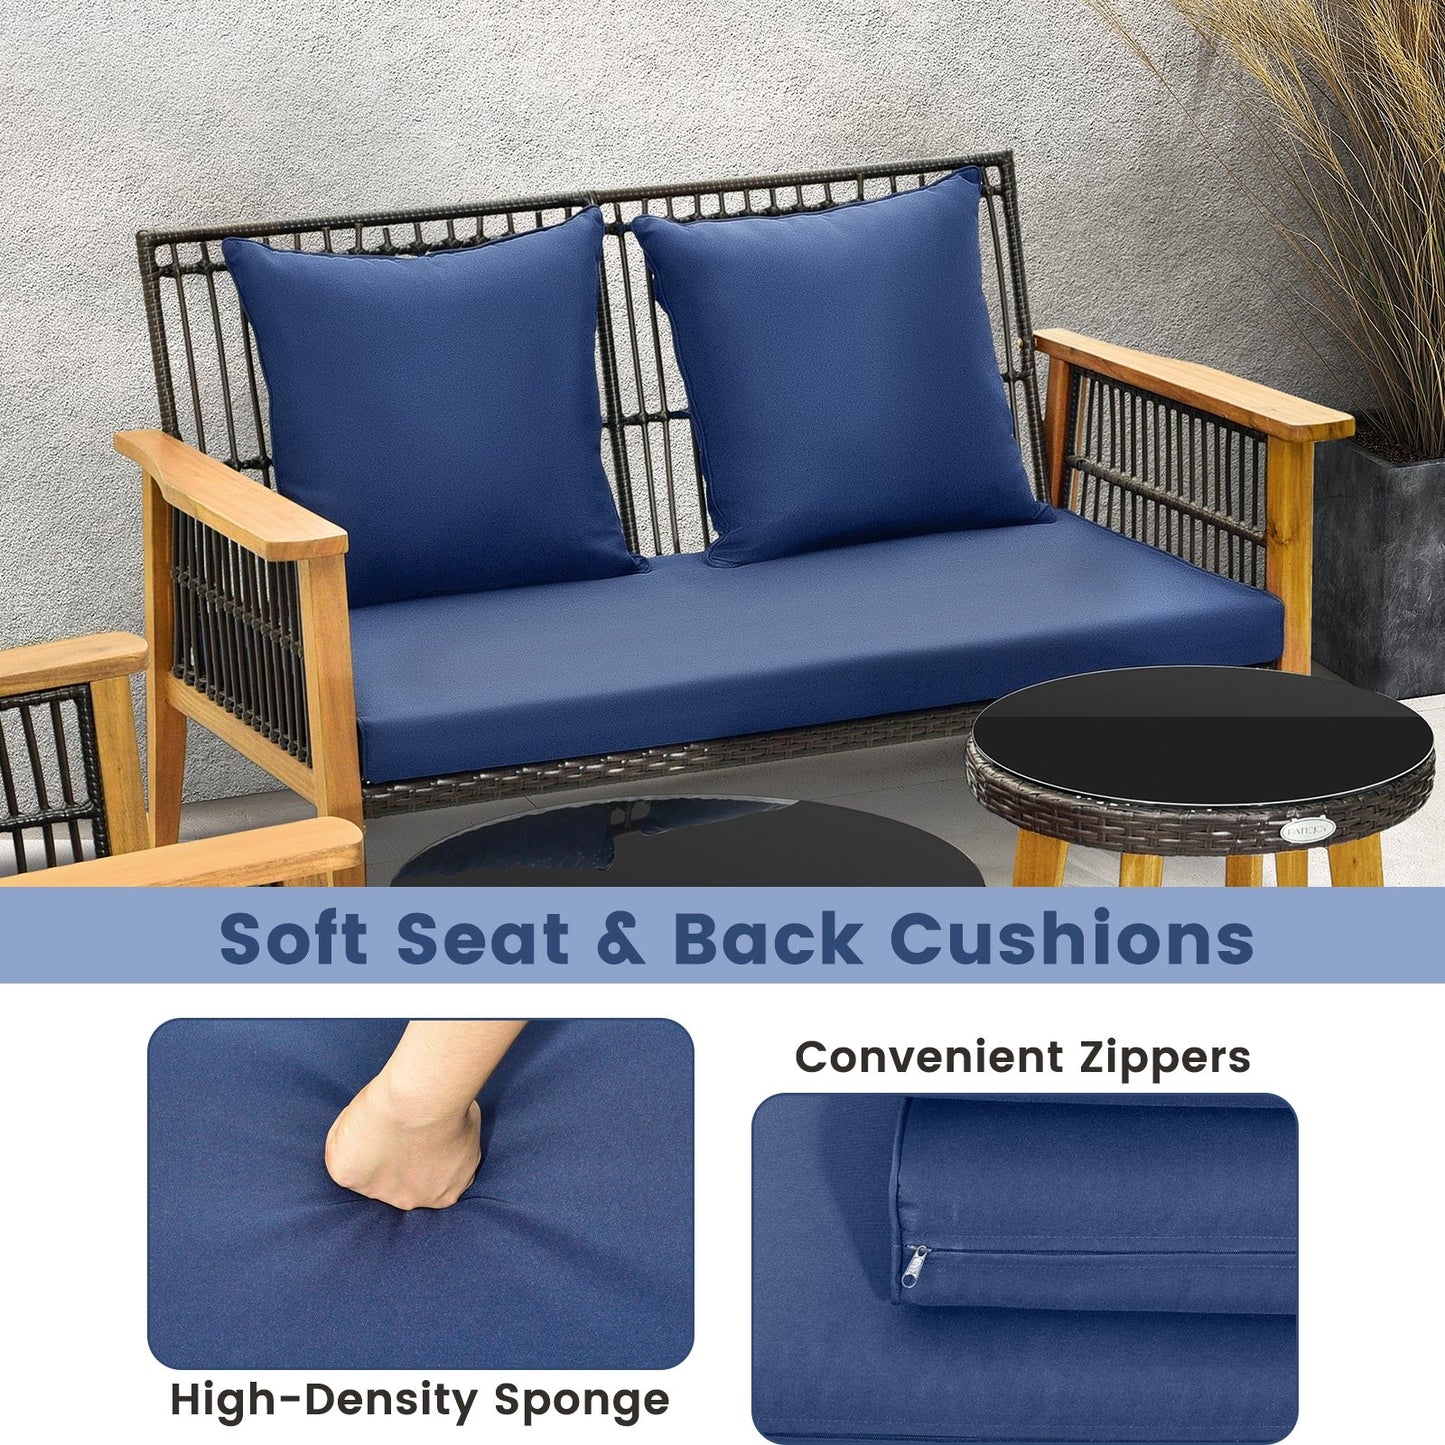 7 Piece Outdoor Conversation Set with Stable Acacia Wood Frame Cozy Seat & Back Cushions, Navy